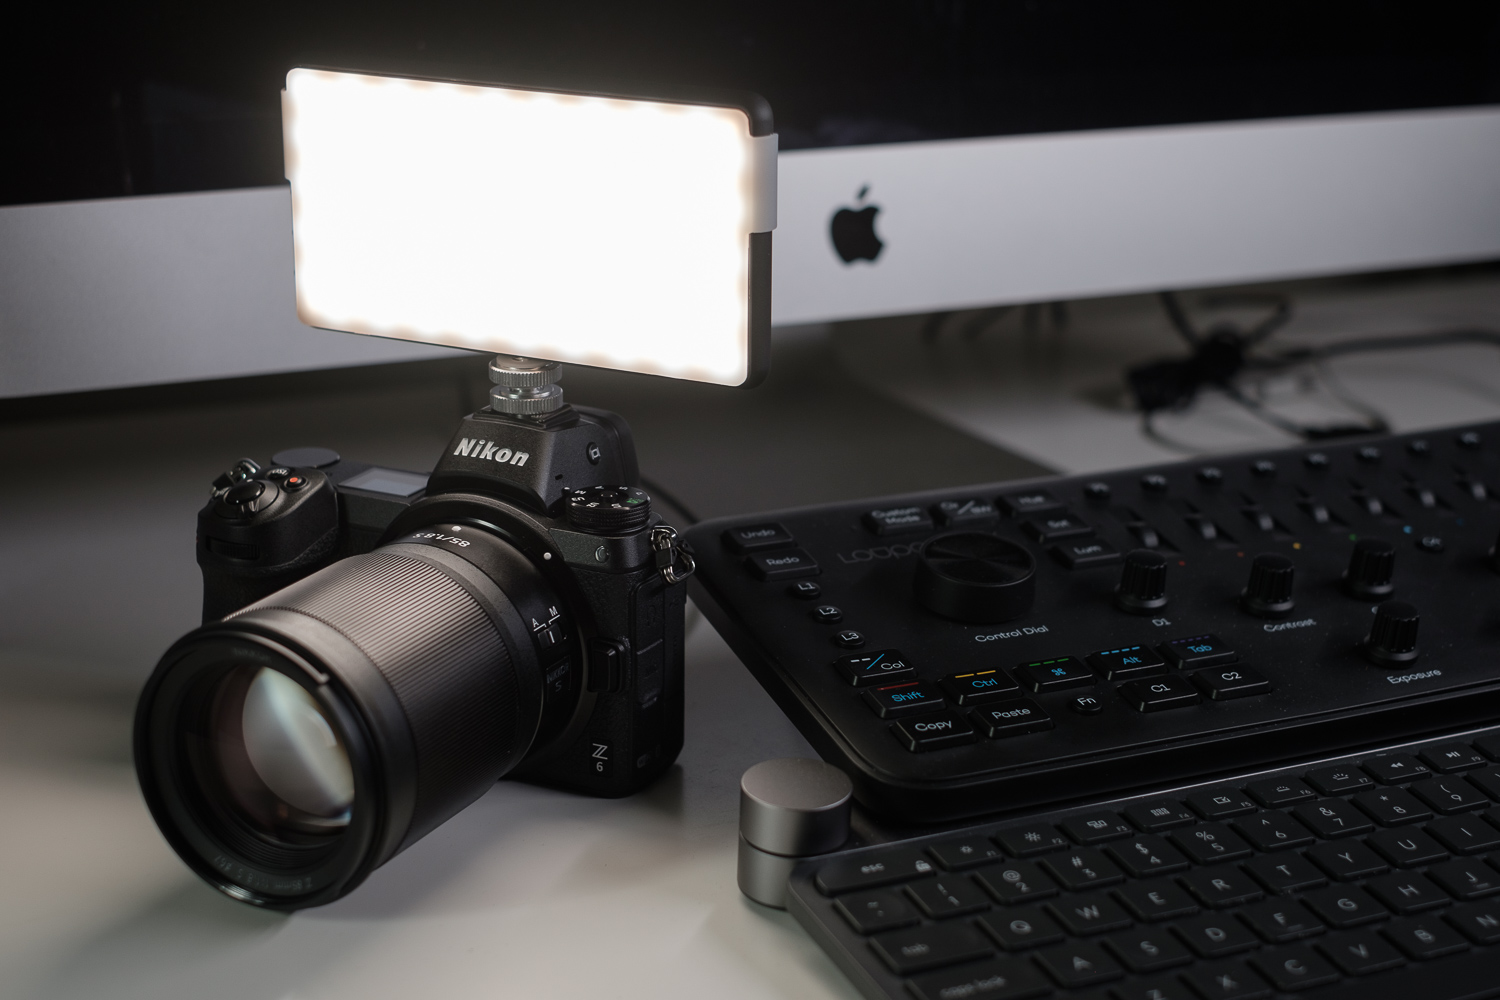 Phone-Sized Lume Cube LED Panel is a Pocketable Video Light